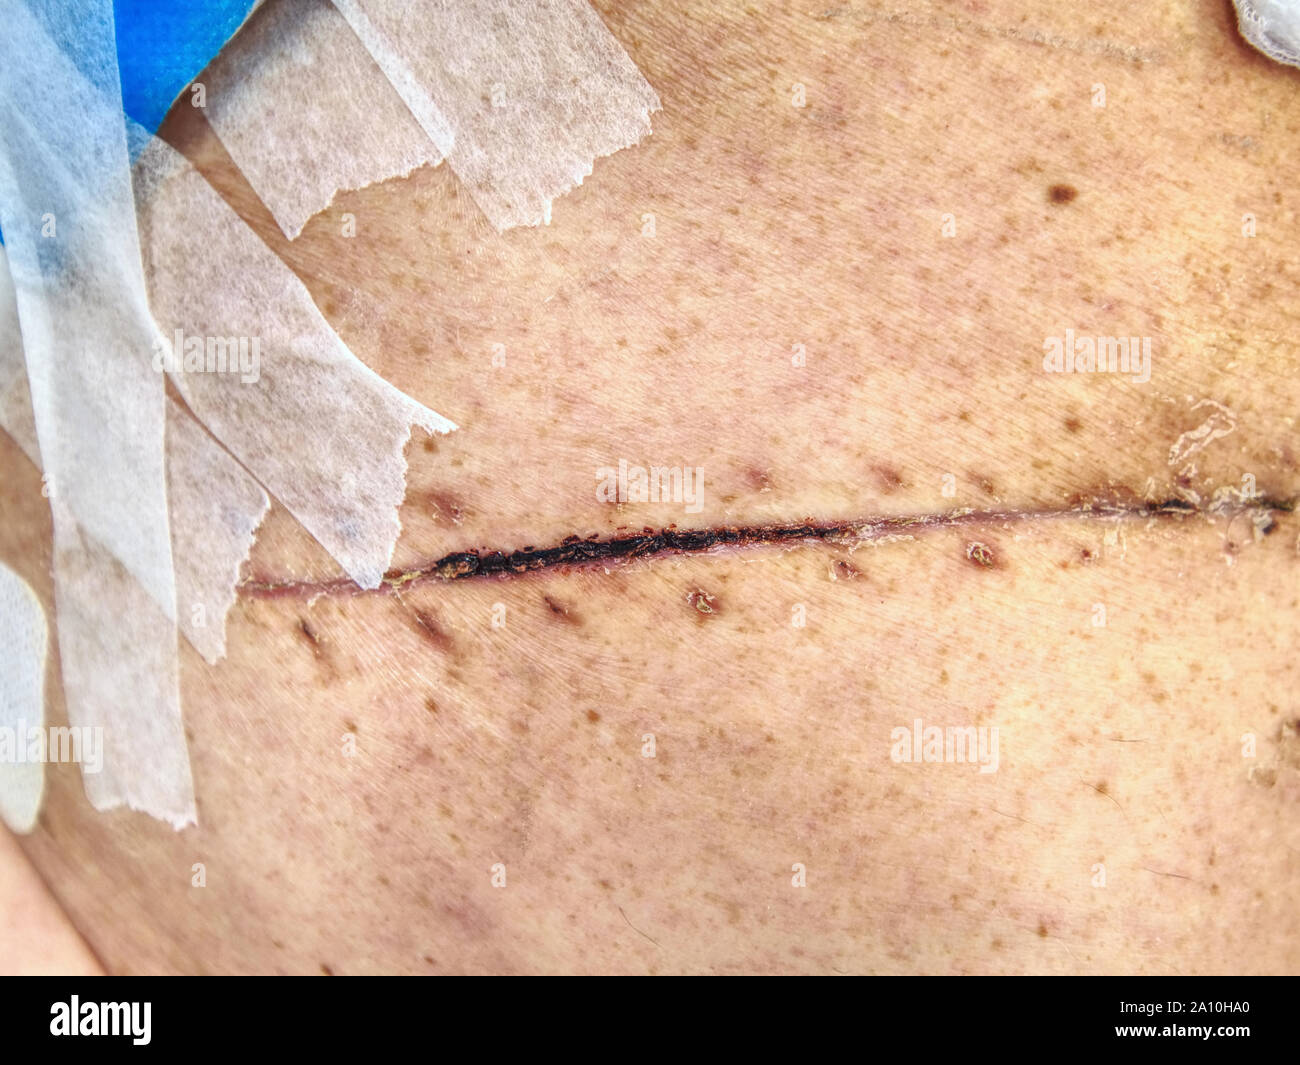 Father after cancer  liver and bowel cancer surgery. Bandage of fresh scar on the abdomen and side of male body. Stock Photo